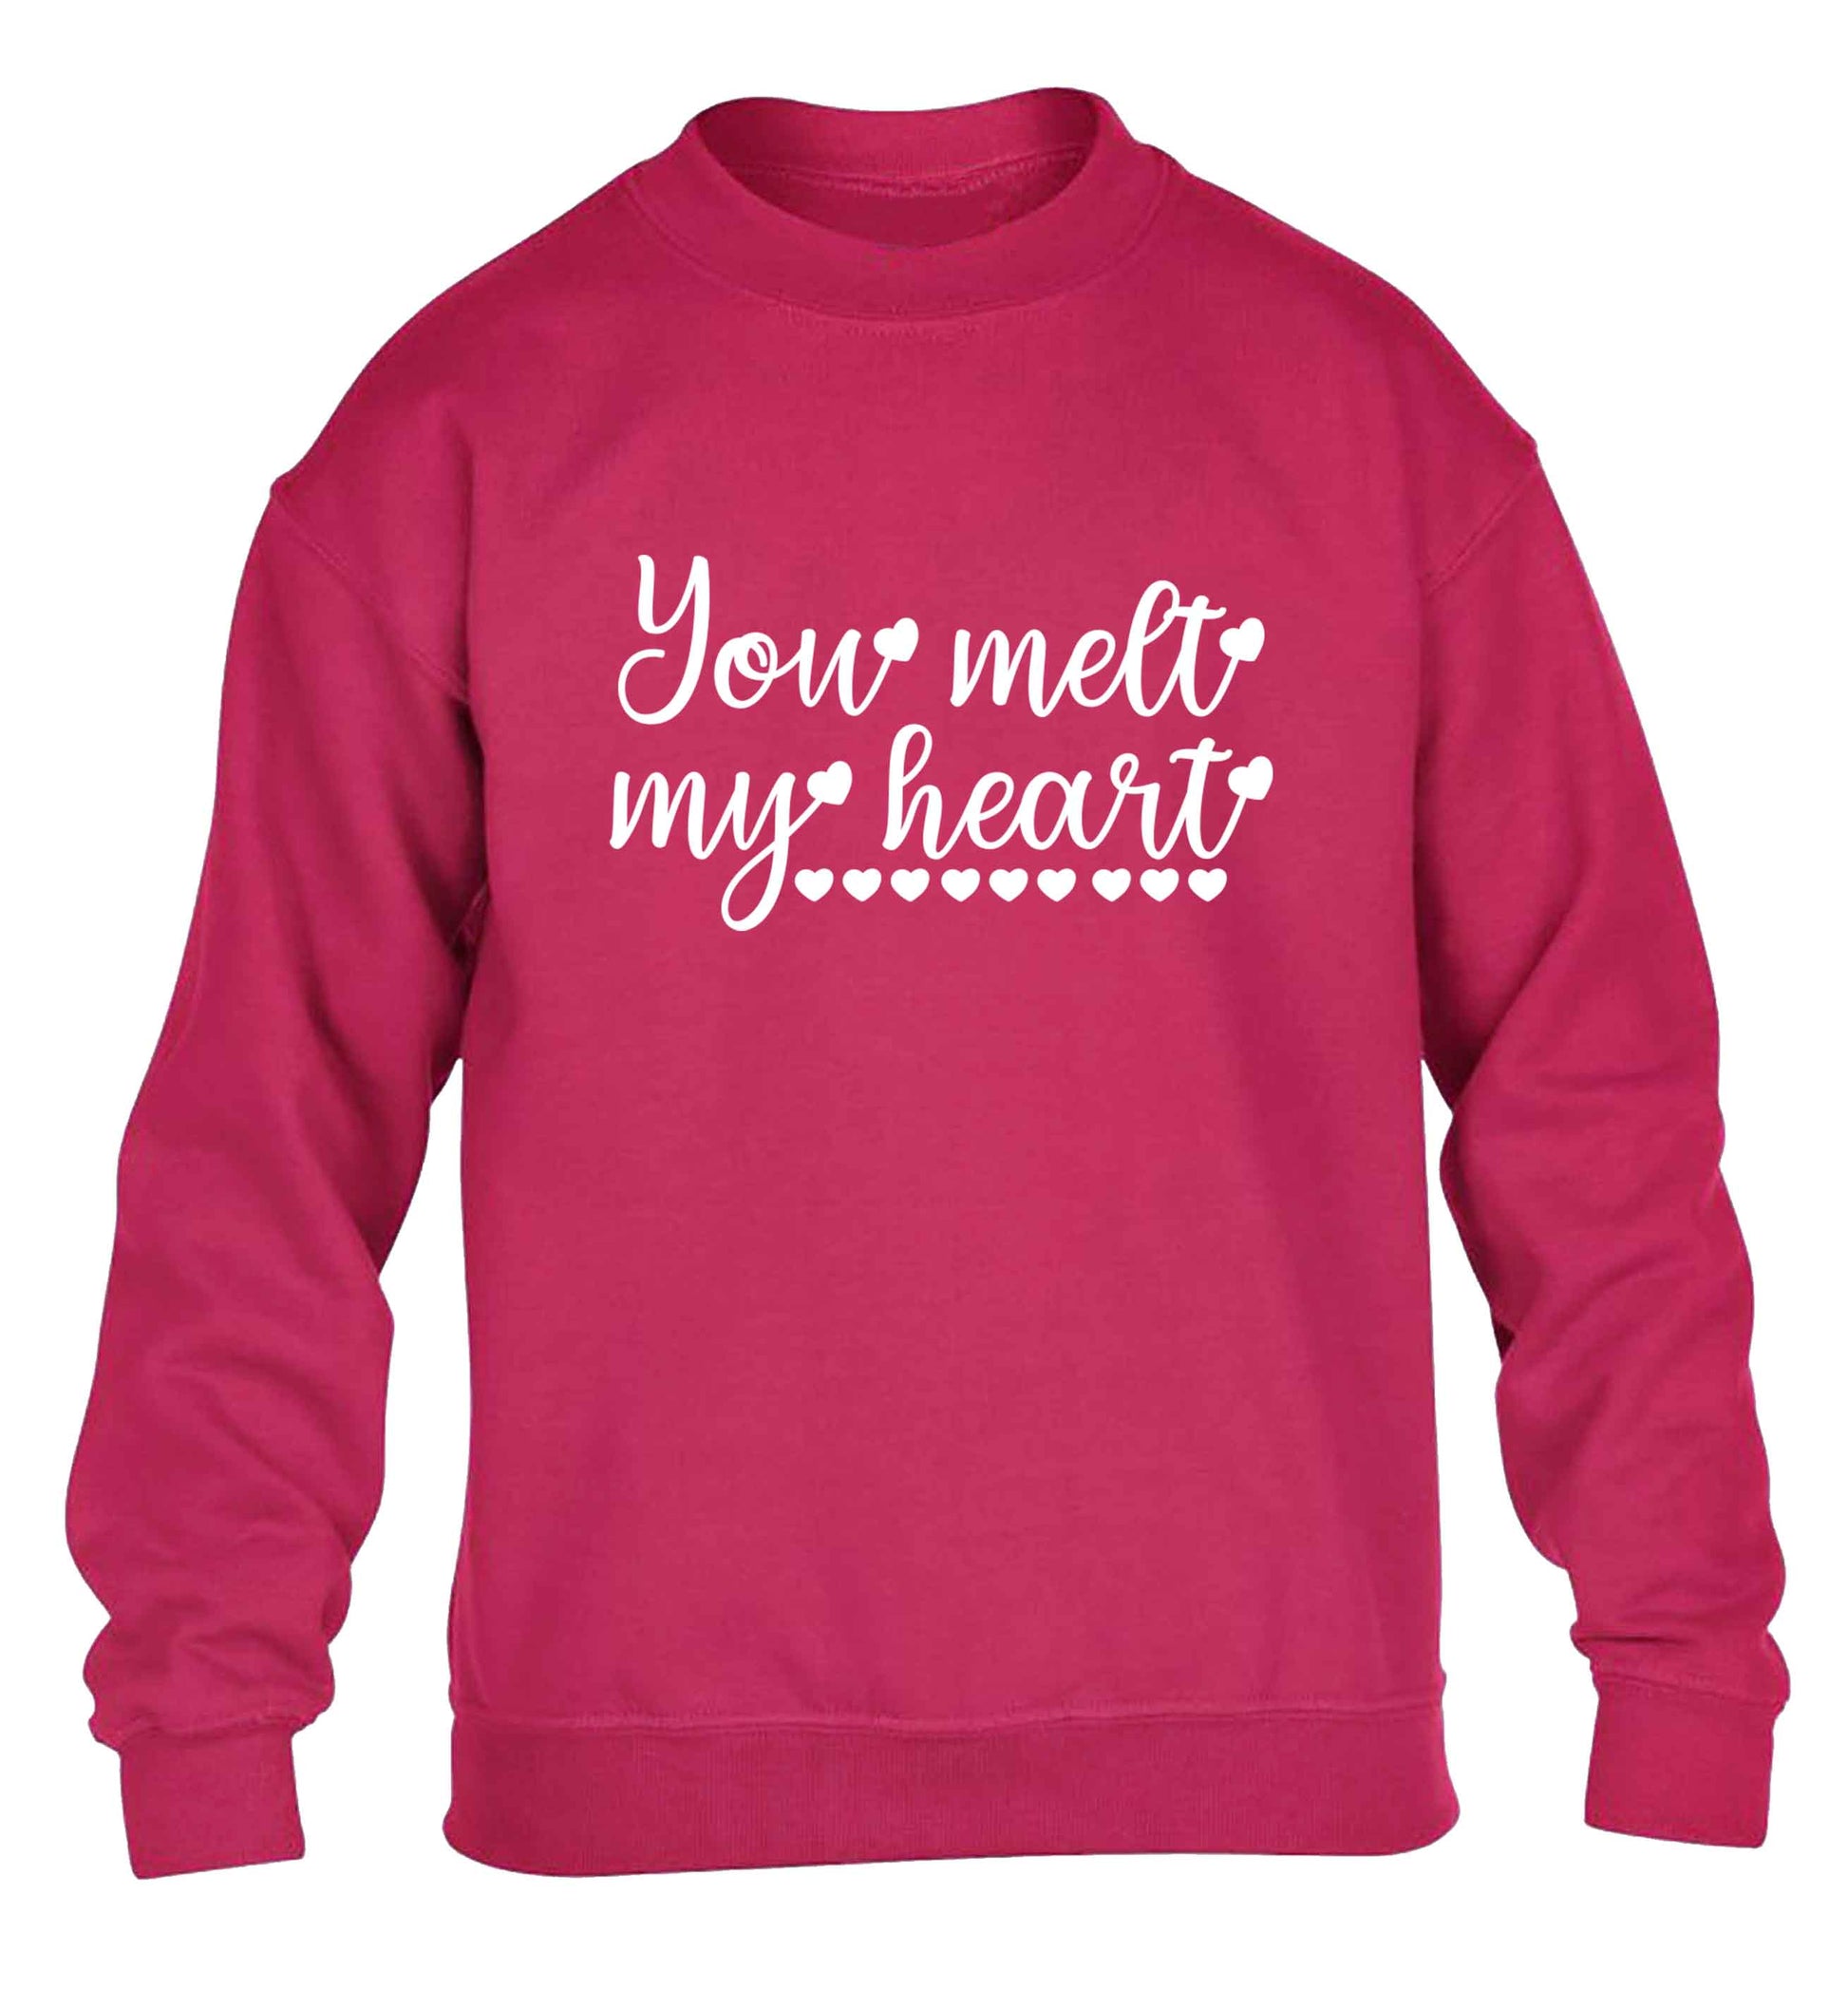 You melt my heart children's pink sweater 12-13 Years